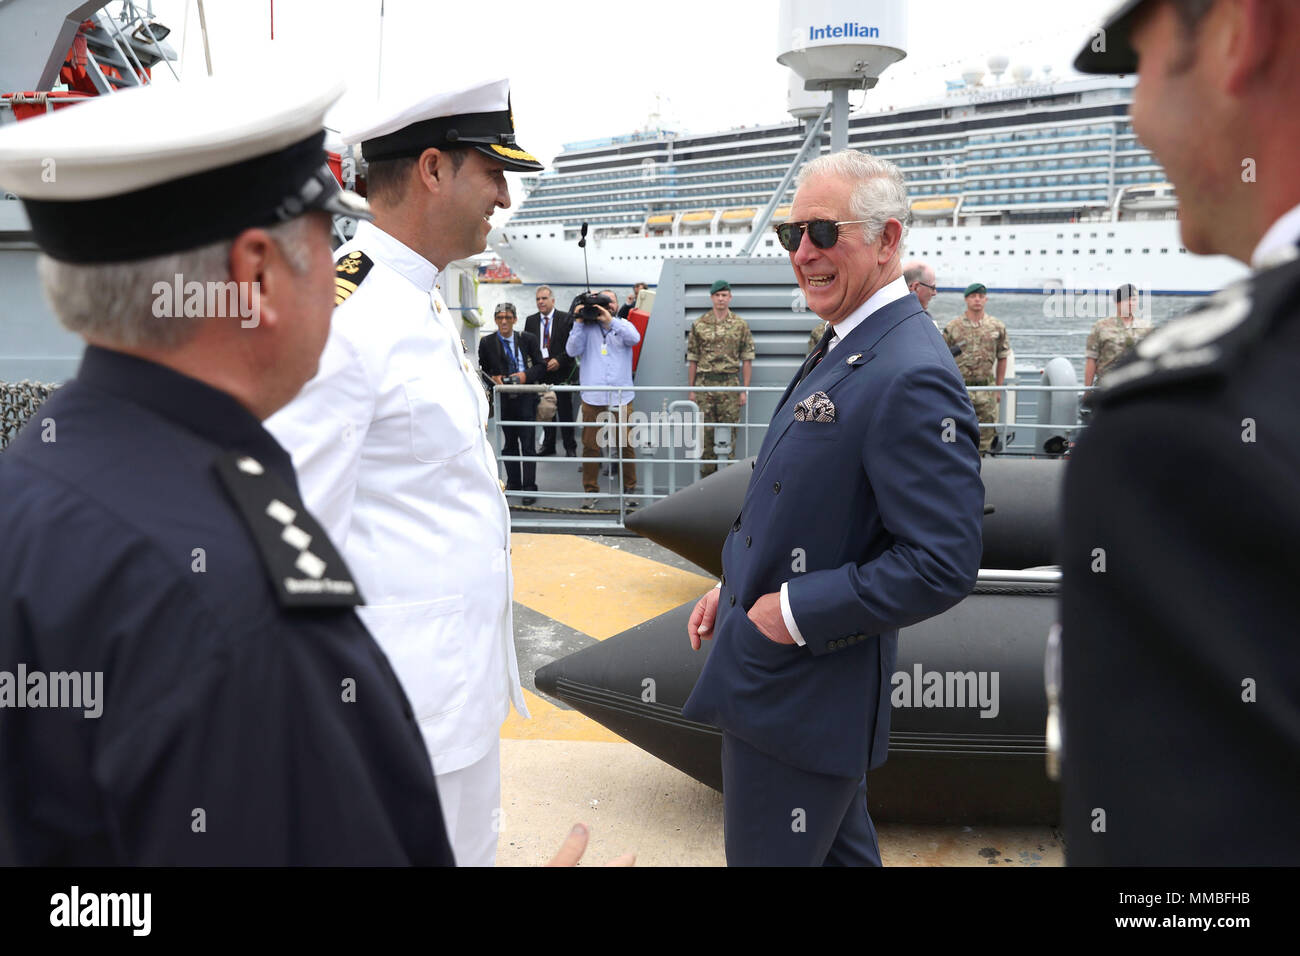 The Prince of Wales tours HMC Valiant during a visit to the Piraeus Maritime Training Centre, in Piraeus, Greece, as part of his visit to the country. Stock Photo